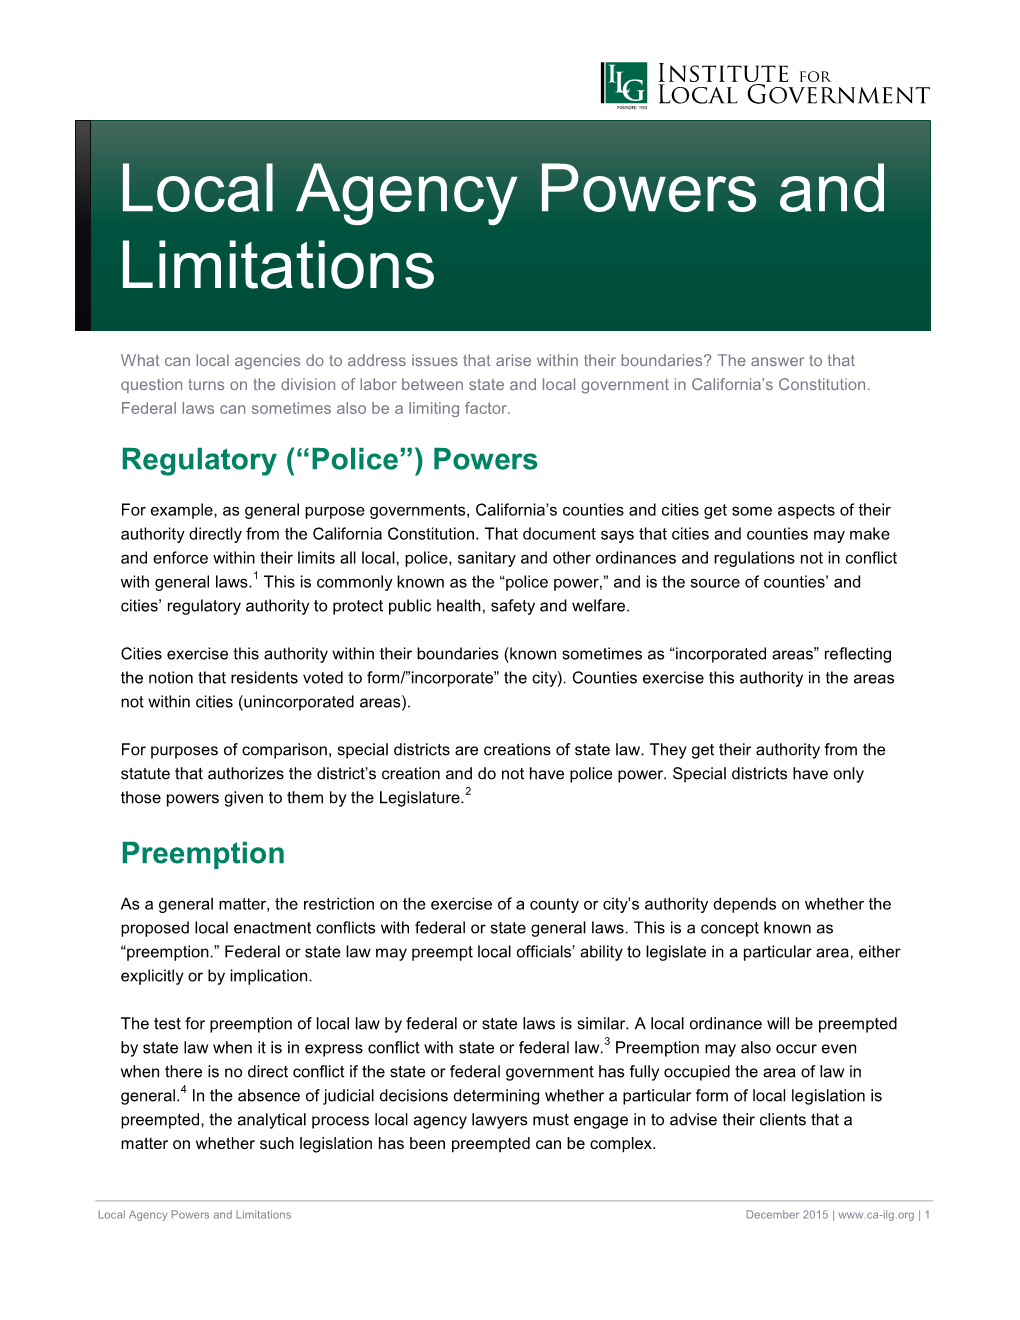 Local Agency Powers and Limitations